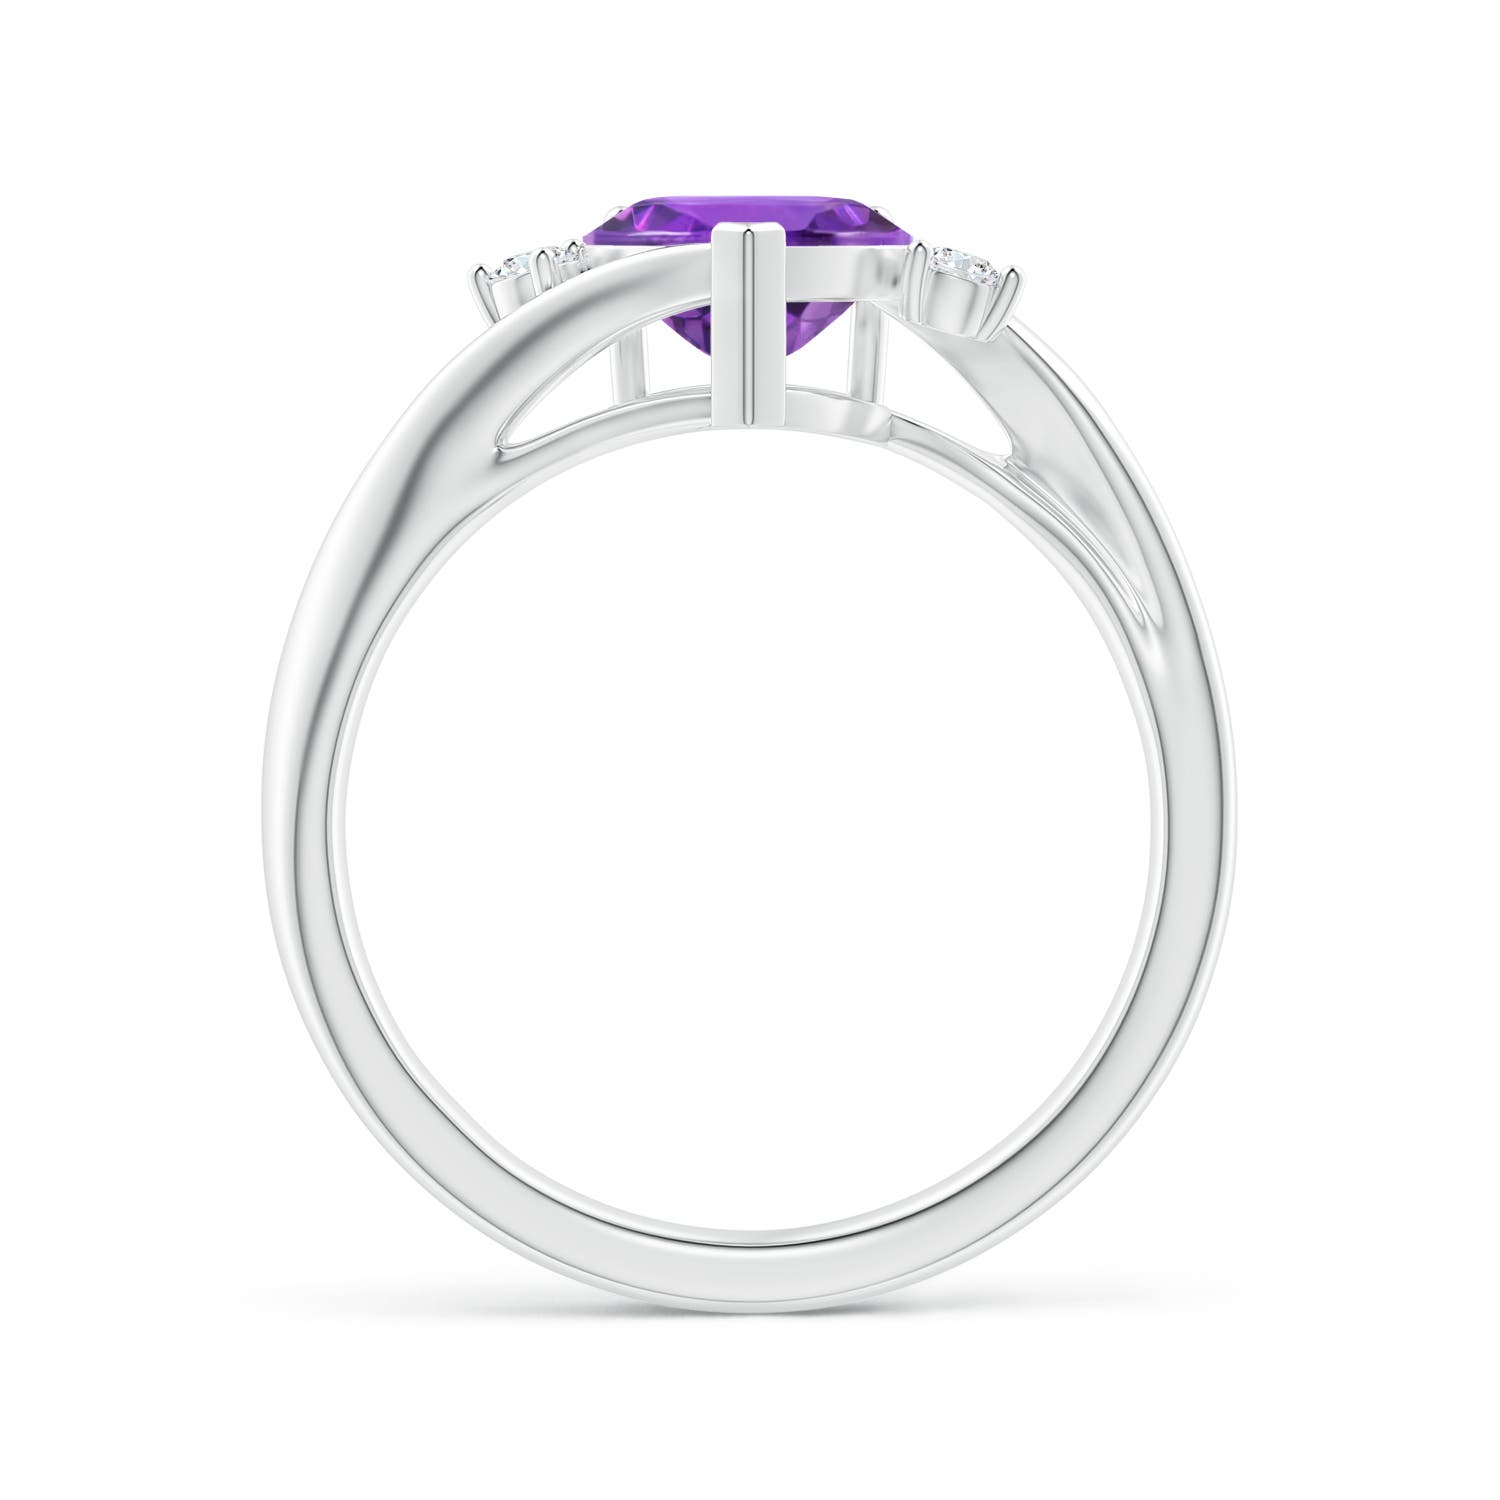 AAA - Amethyst / 1.17 CT / 14 KT White Gold